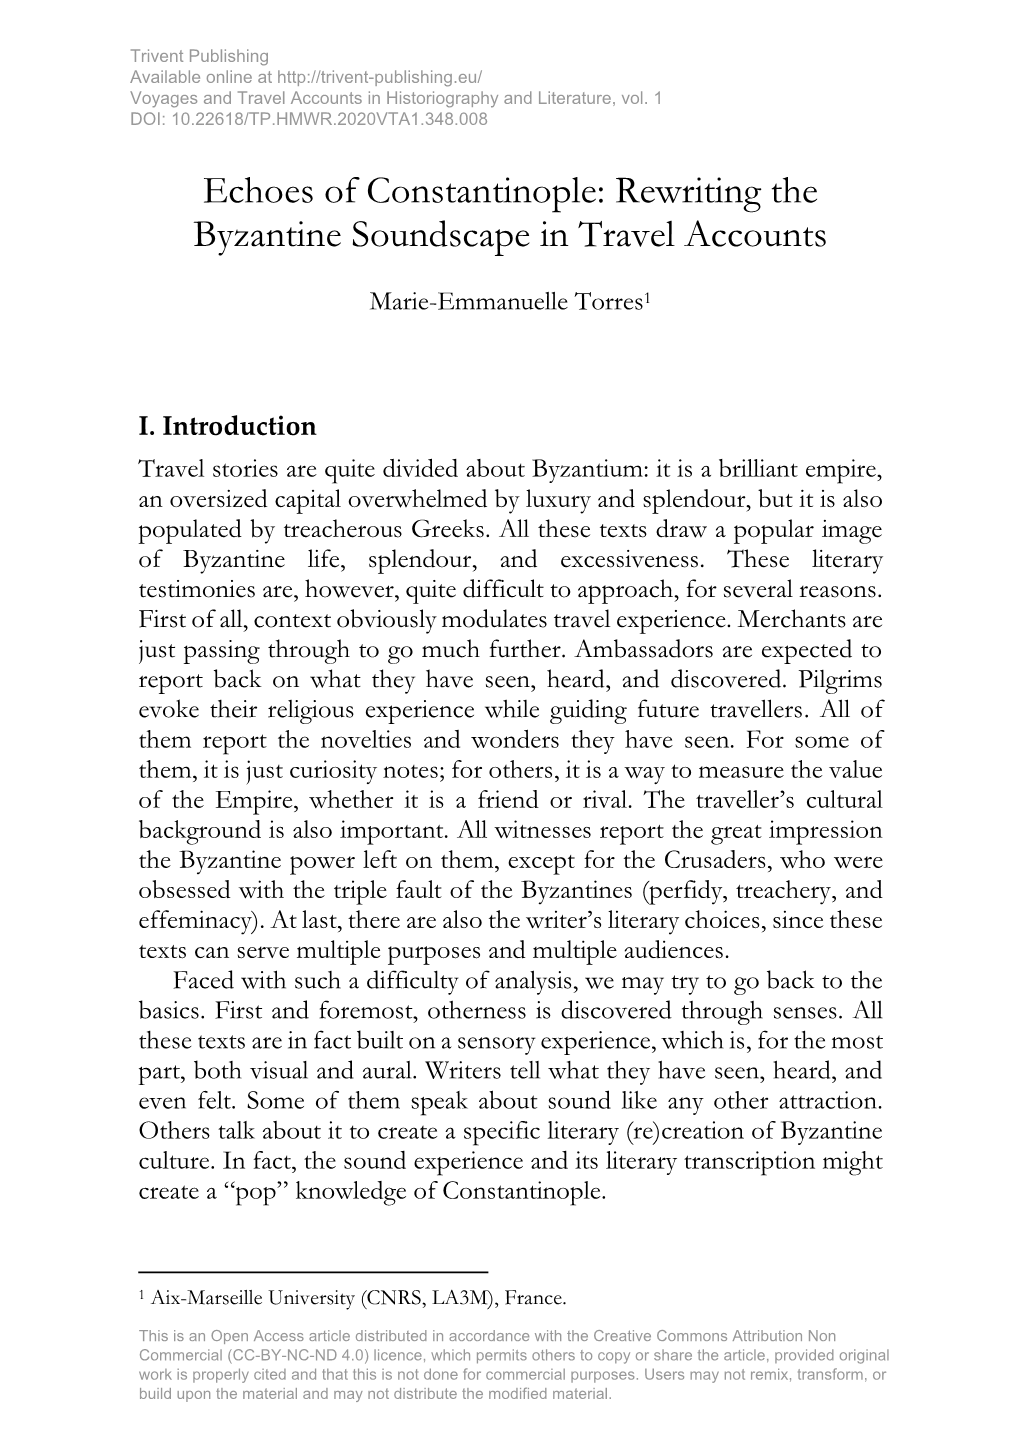 Echoes of Constantinople: Rewriting the Byzantine Soundscape in Travel Accounts